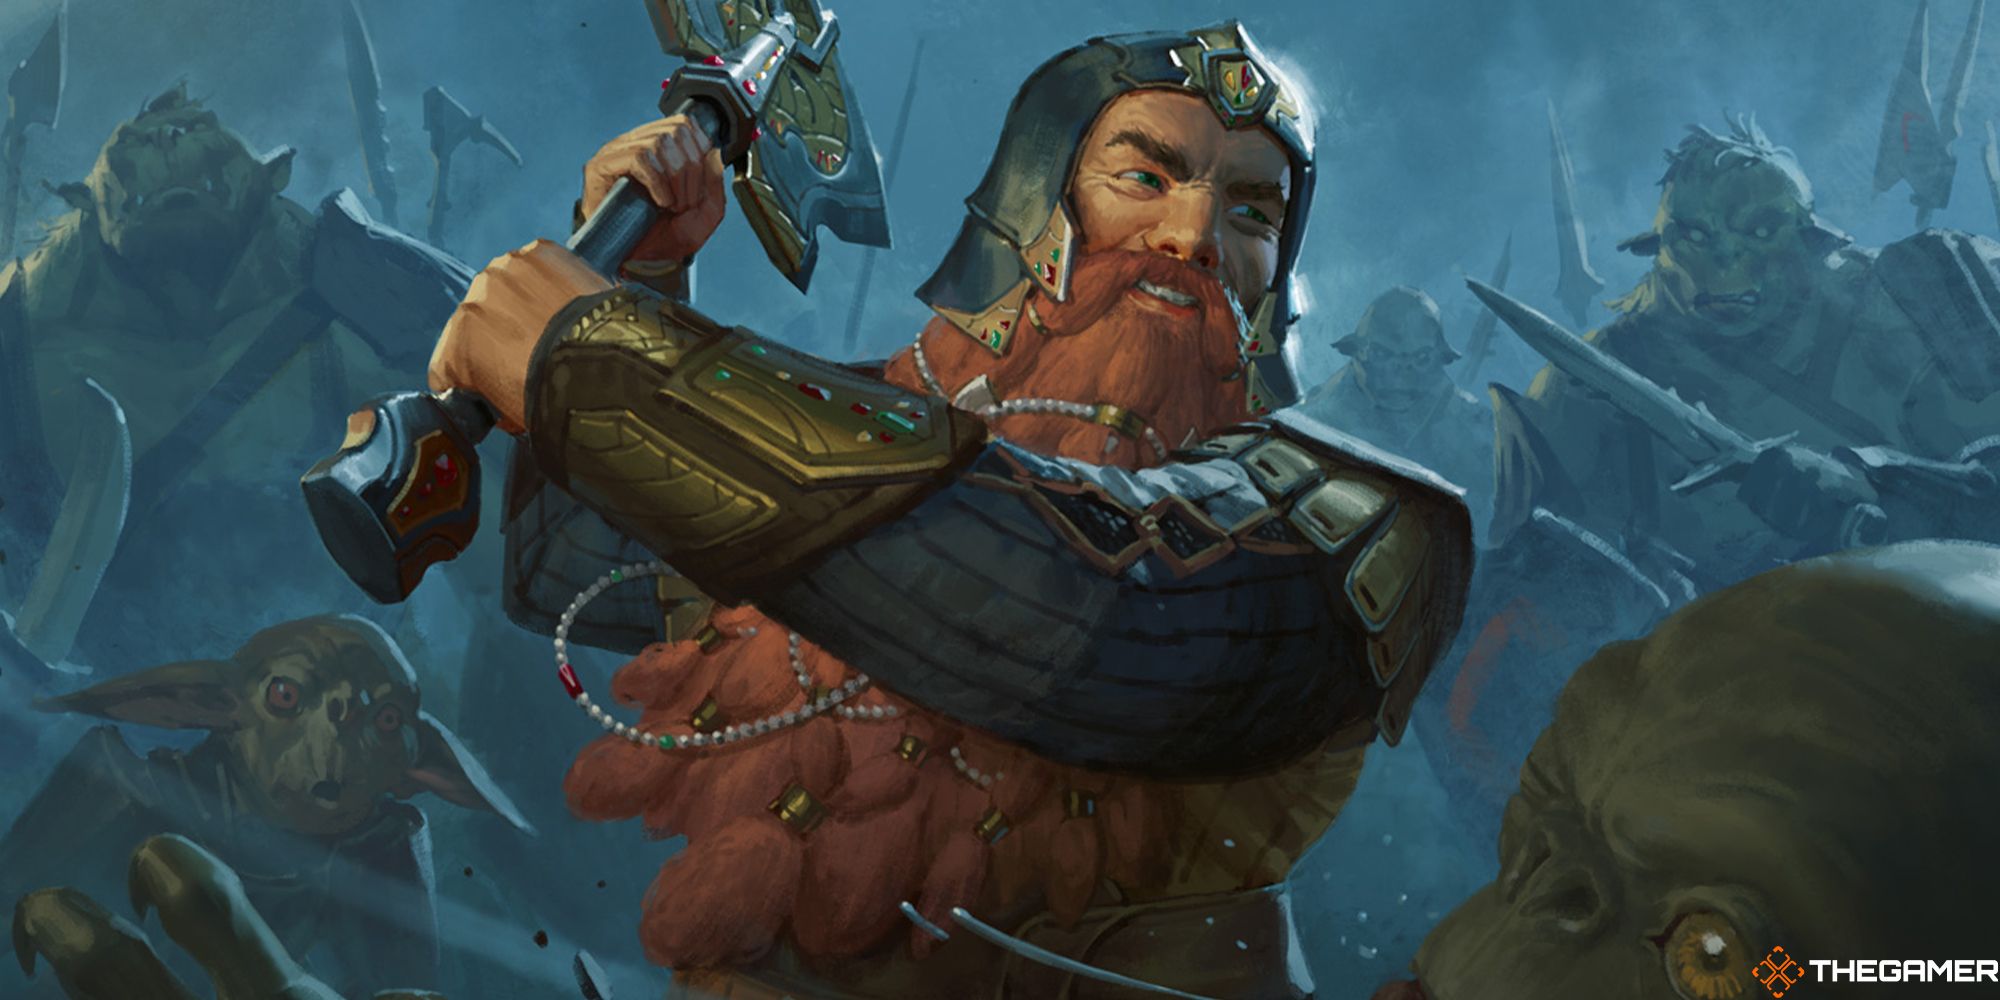 Gimli from Lord of the Rings in MTG